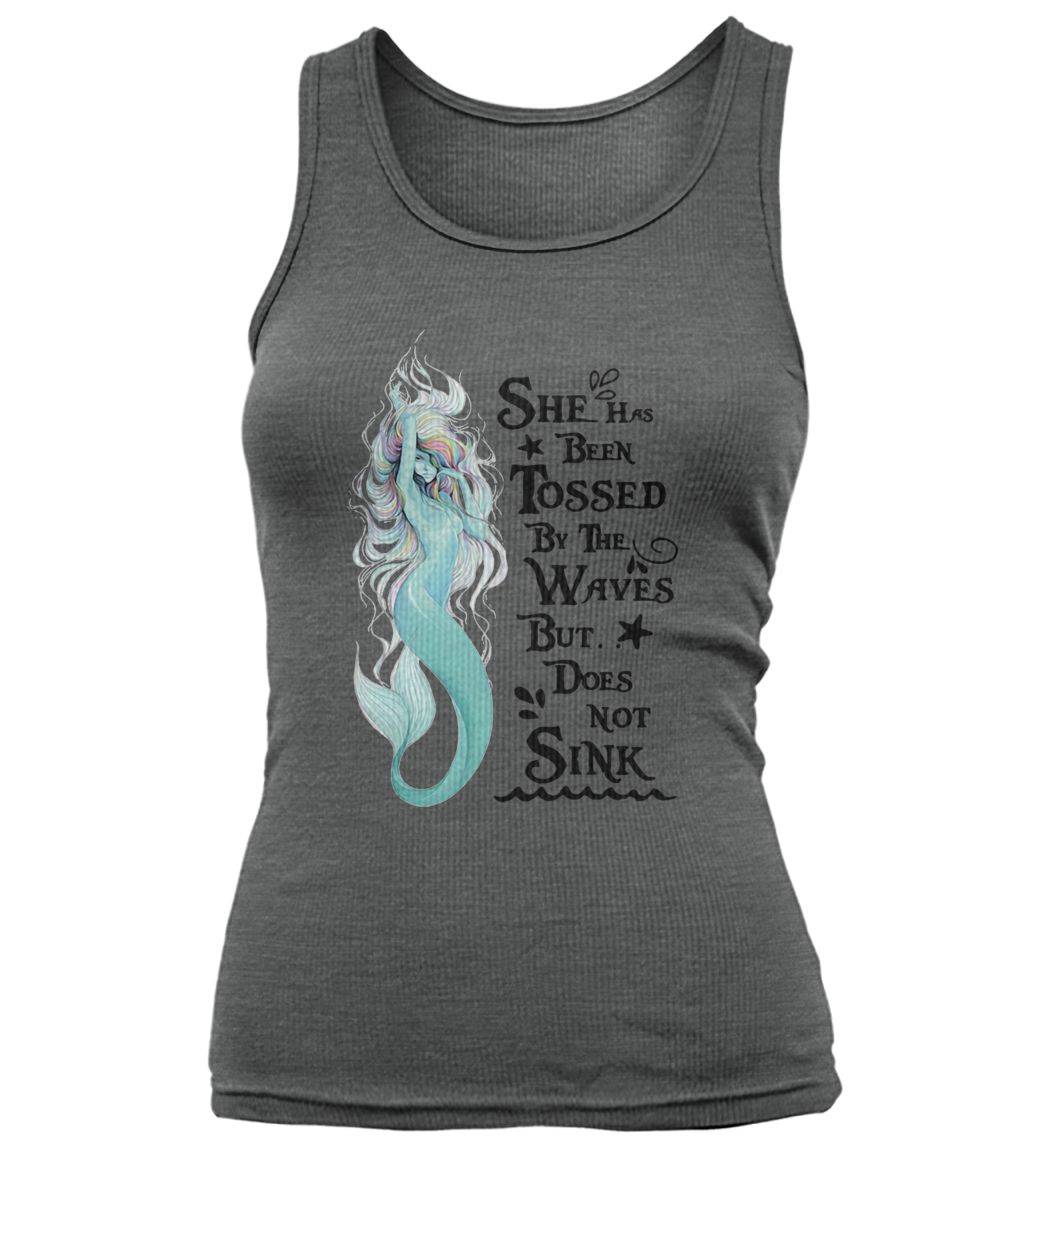 Mermaid she has been tossed by the waves but does not sink women's tank top